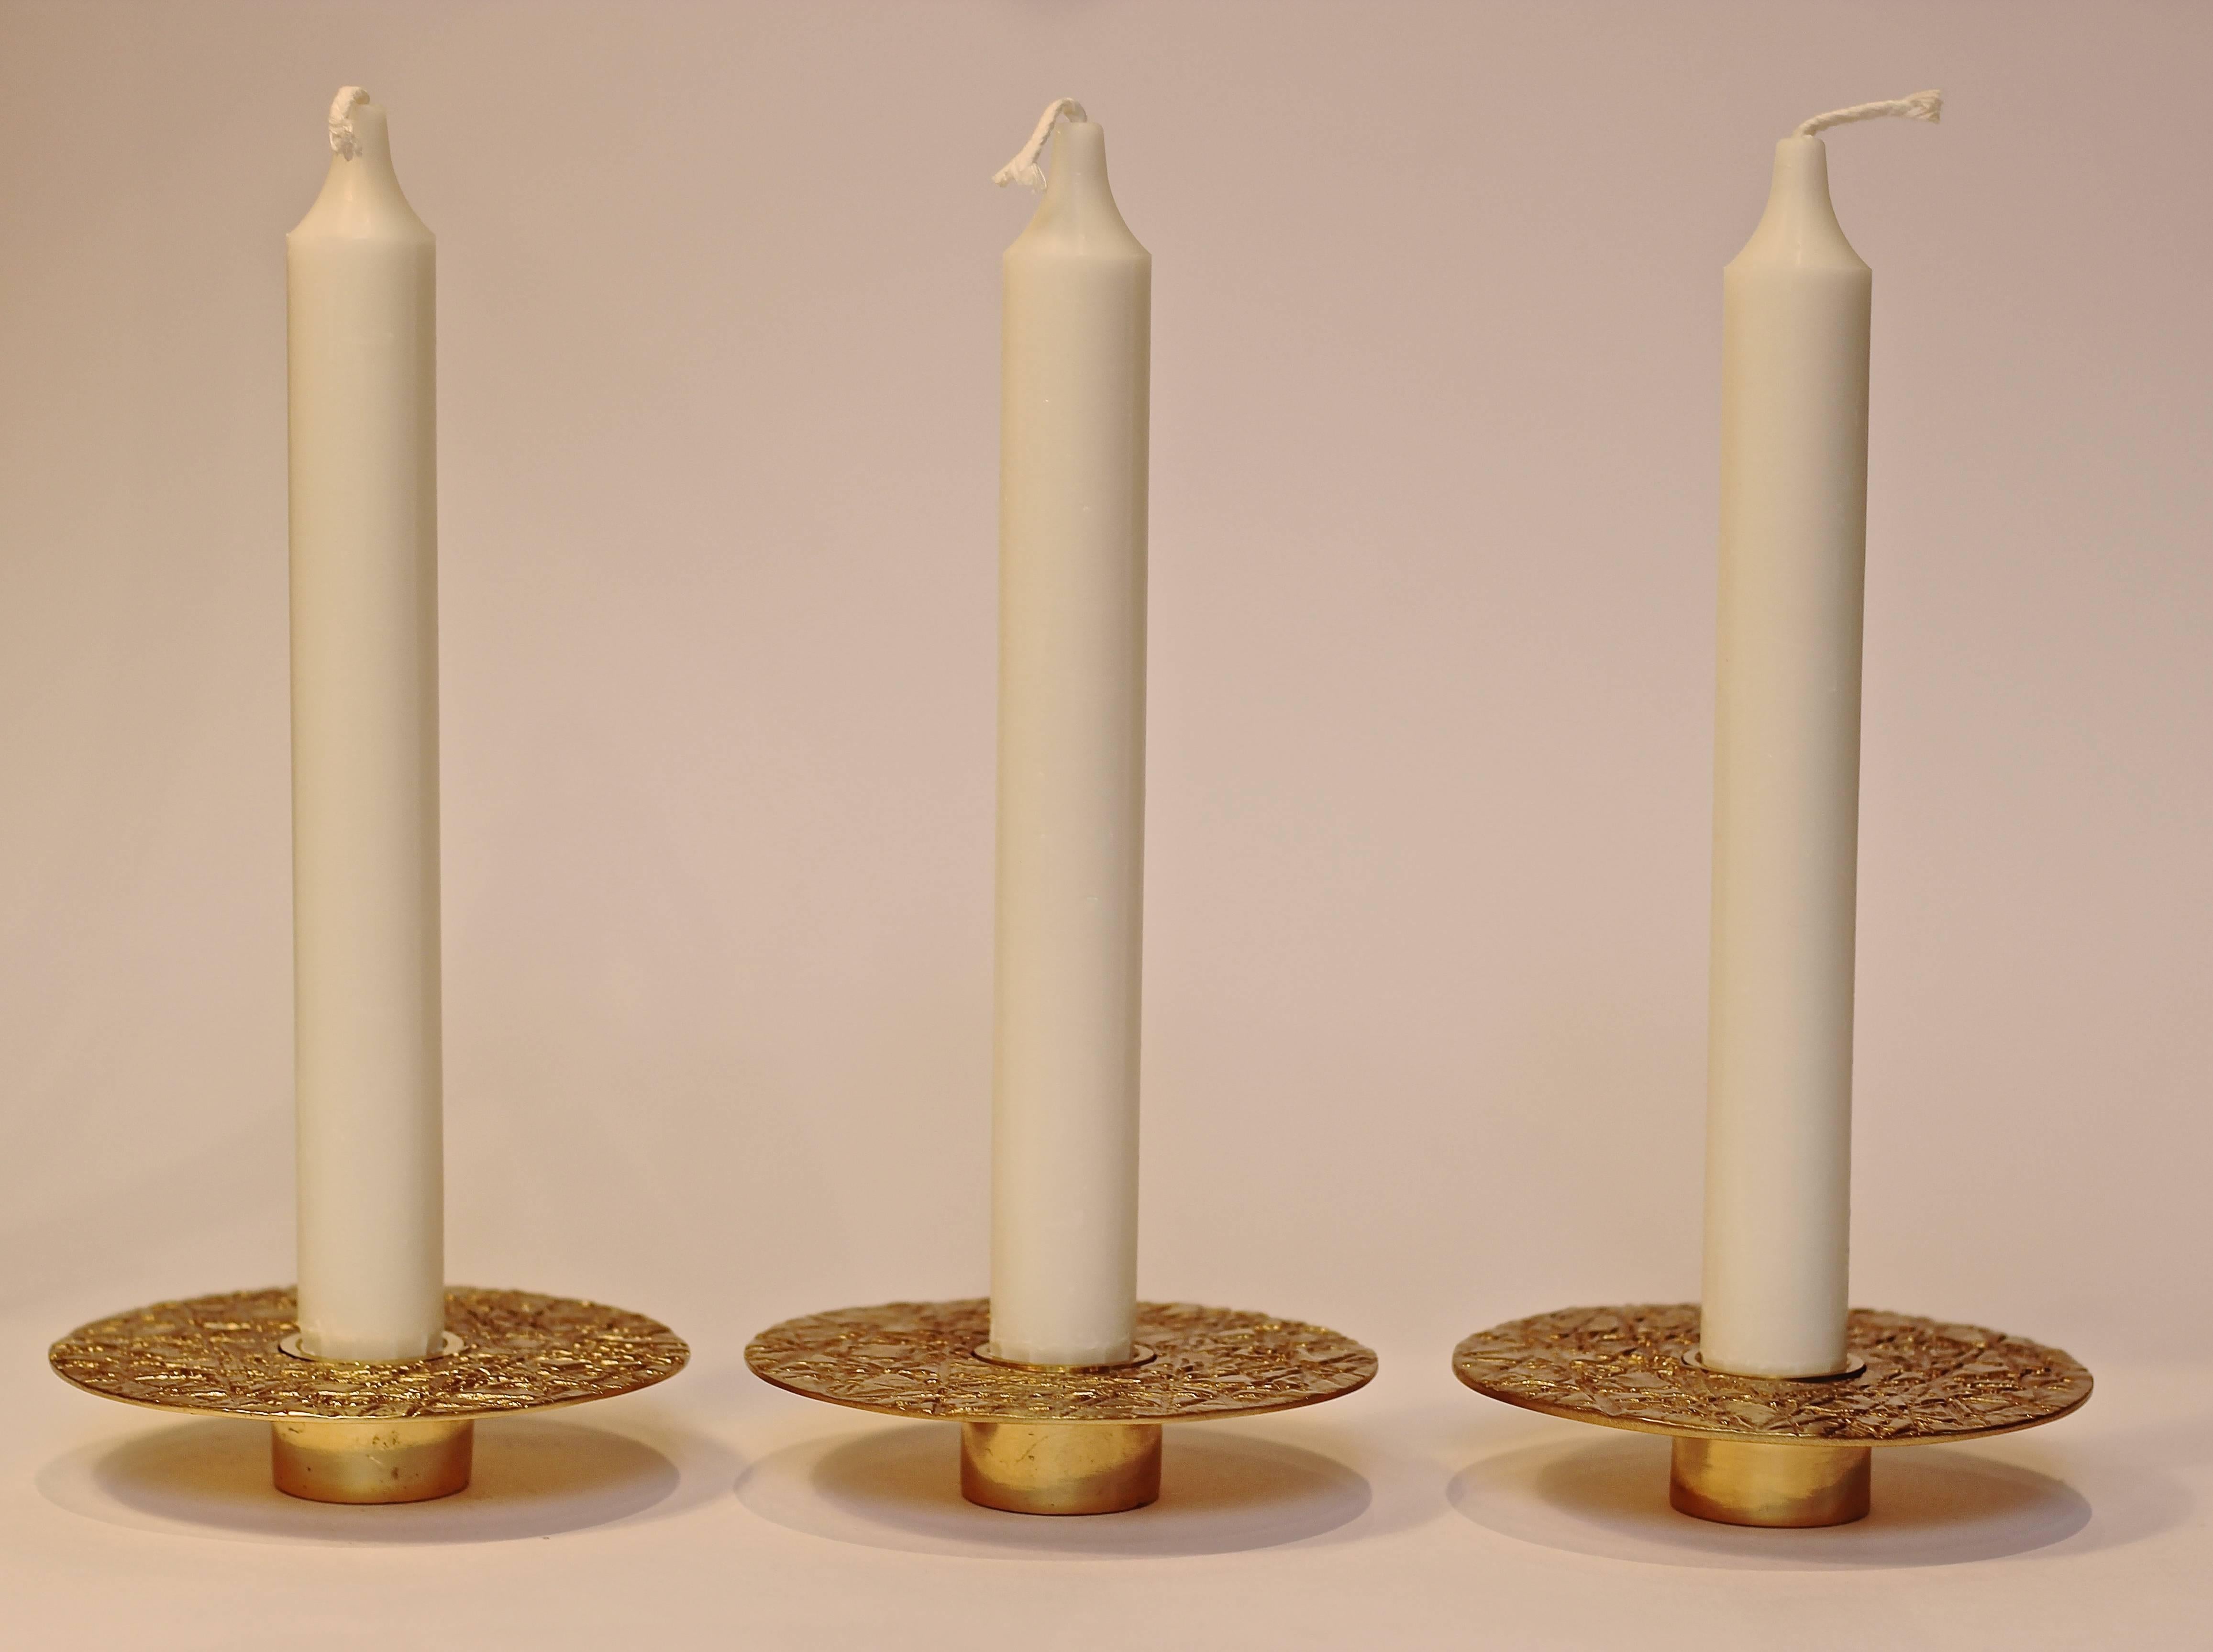 Each of those original brass candleholders is handmade individually. Cast and textured using very traditional techniques, they are polished to reveal the lustrous finish of this beautiful material.

Slight variations in the patina and polished